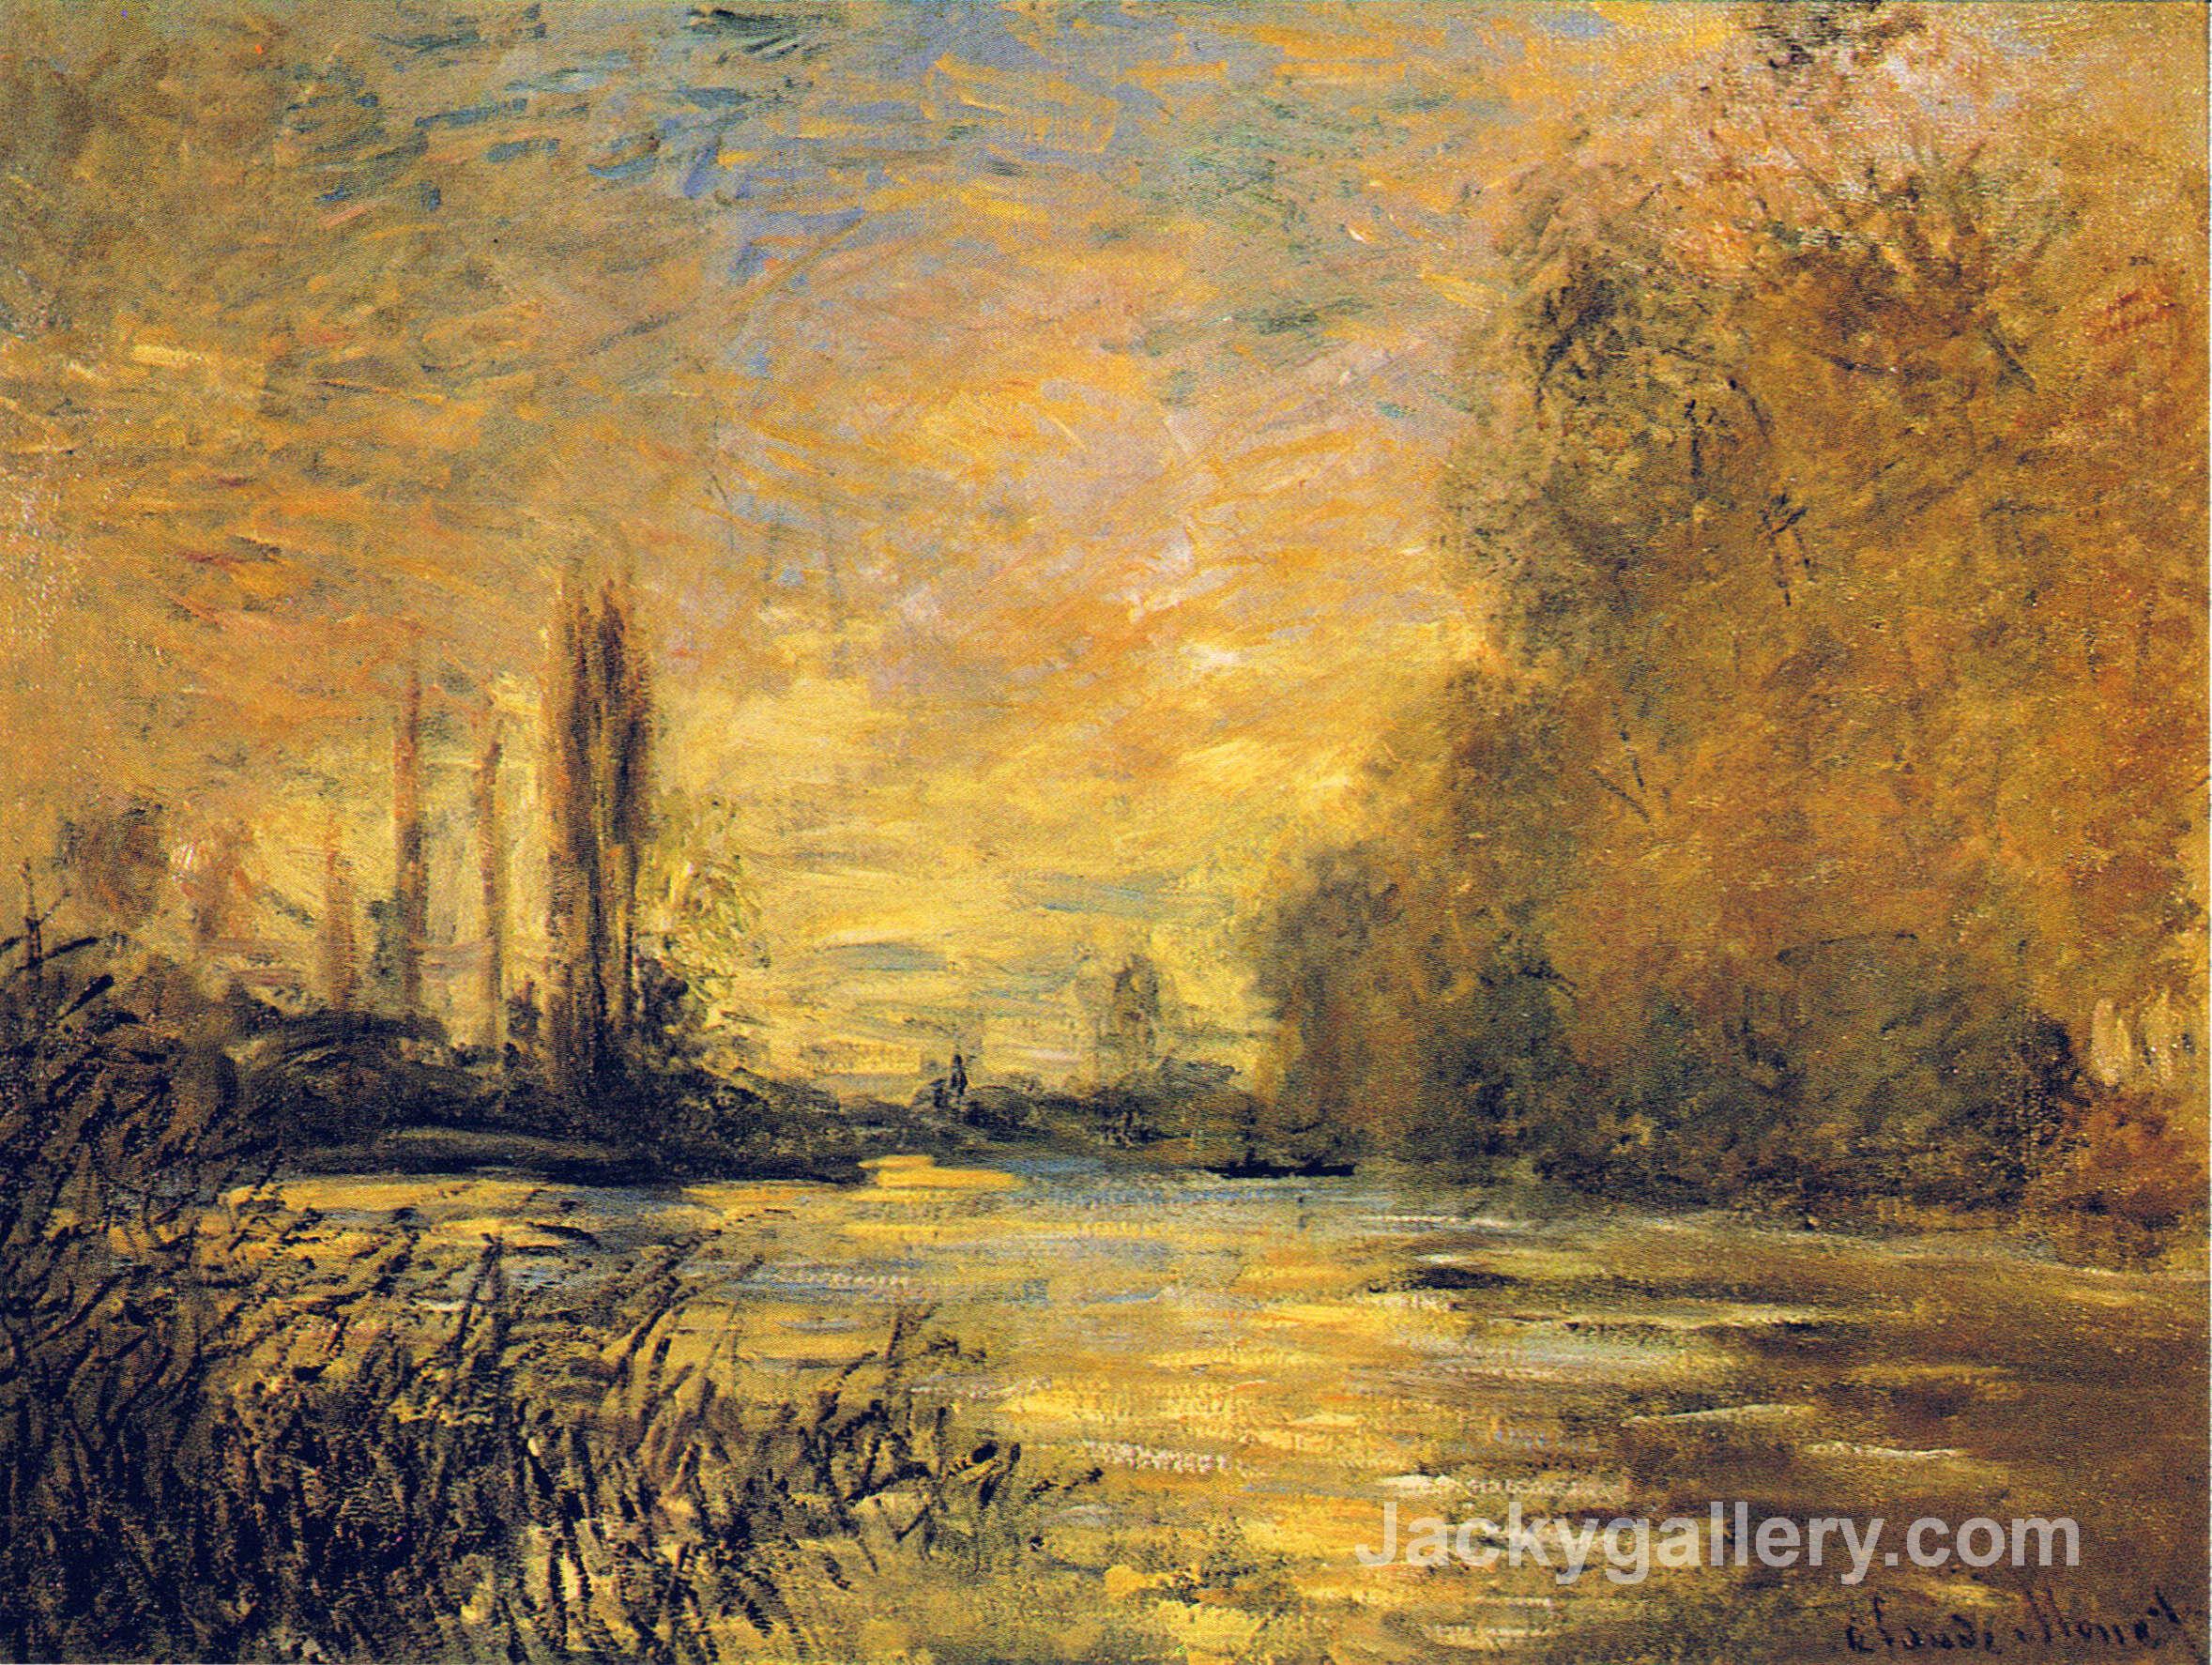 The Small Arm of the Seine at Argenteuil by Claude Monet paintings reproduction